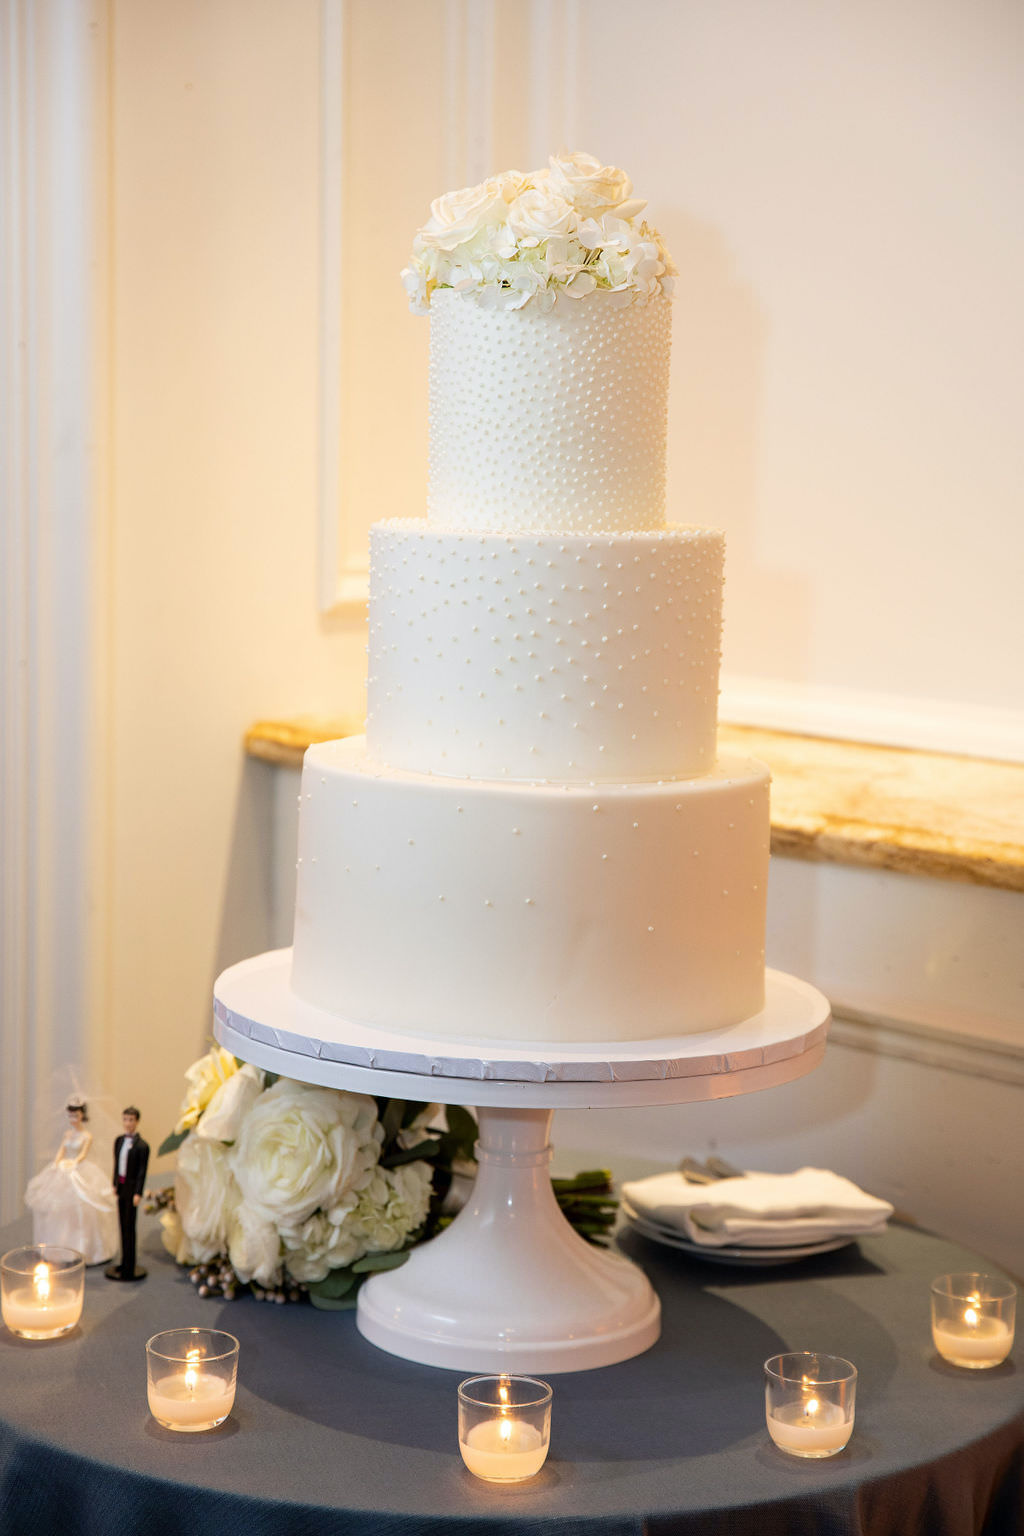 Classic Three Tier Buttercream Wedding Cake with Pearl Beaded Accents, White and Ivory Floral Topper, Tea Lights and Simplistic Cake Table Decor | Luxury Tampa Bay Wedding Planner NK Productions Wedding Planning